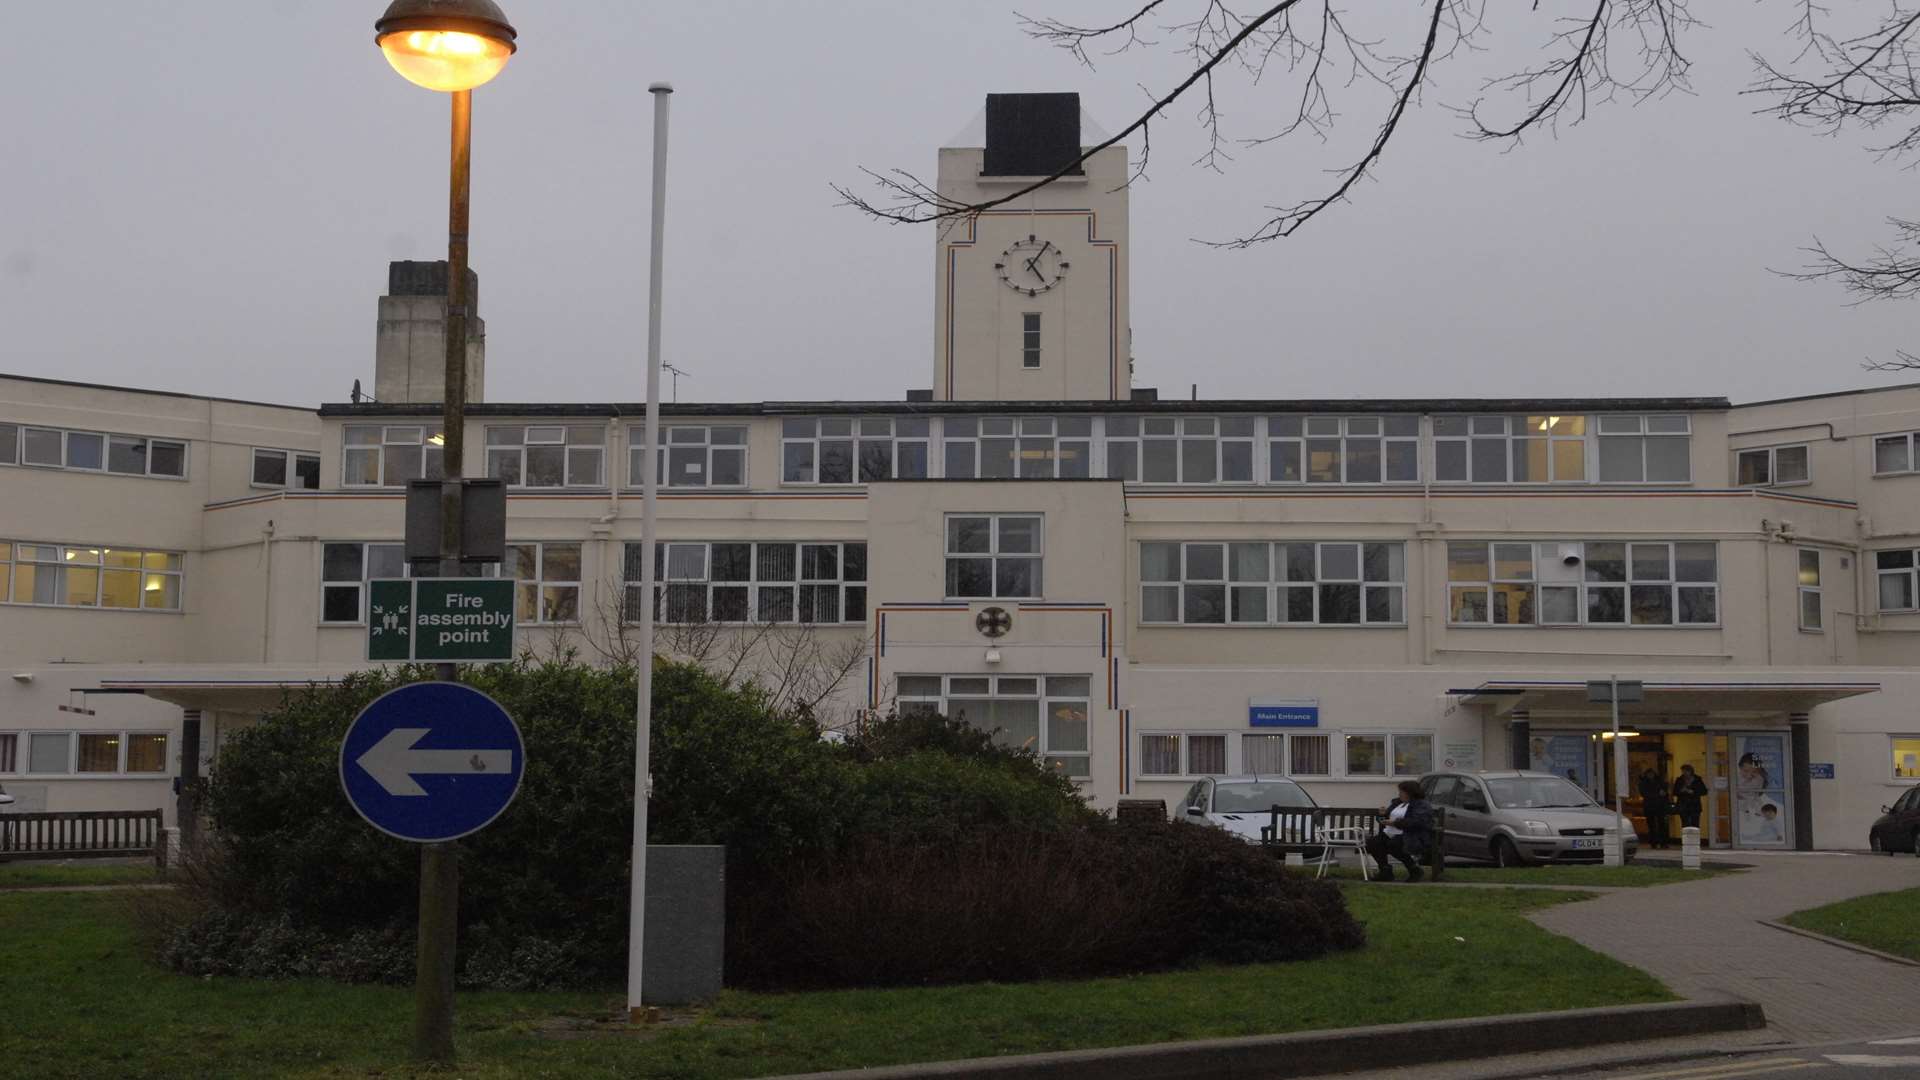 East Kent hospitals took £1.65 million in parking charges from its staff in 2016/17. Picture: Chris Davey